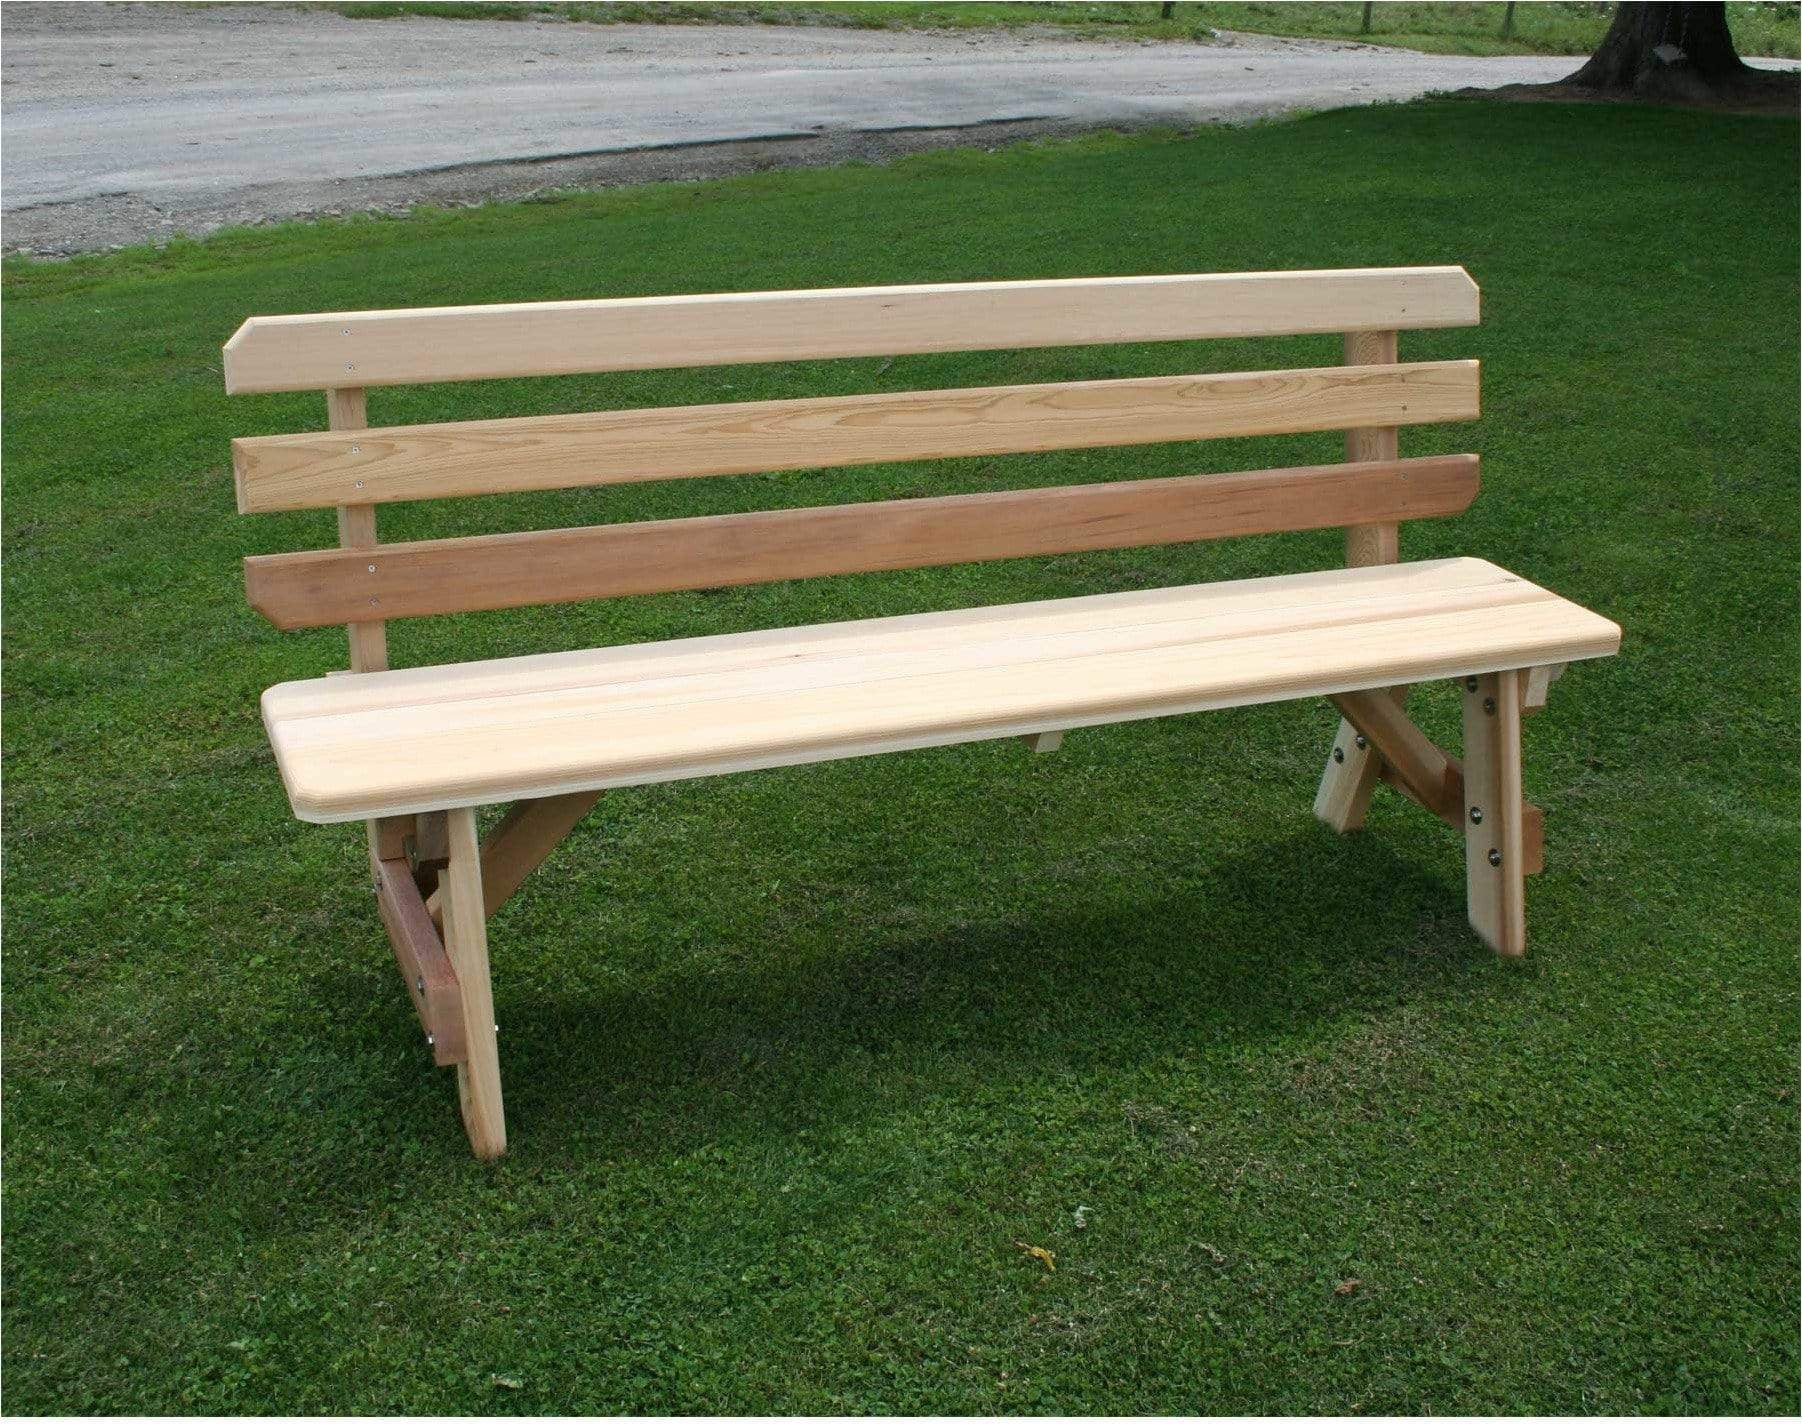 Creekvine Designs Cedar 5' Cross Legged Picnic Table with (2) Backed Benches-Rustic Furniture Marketplace